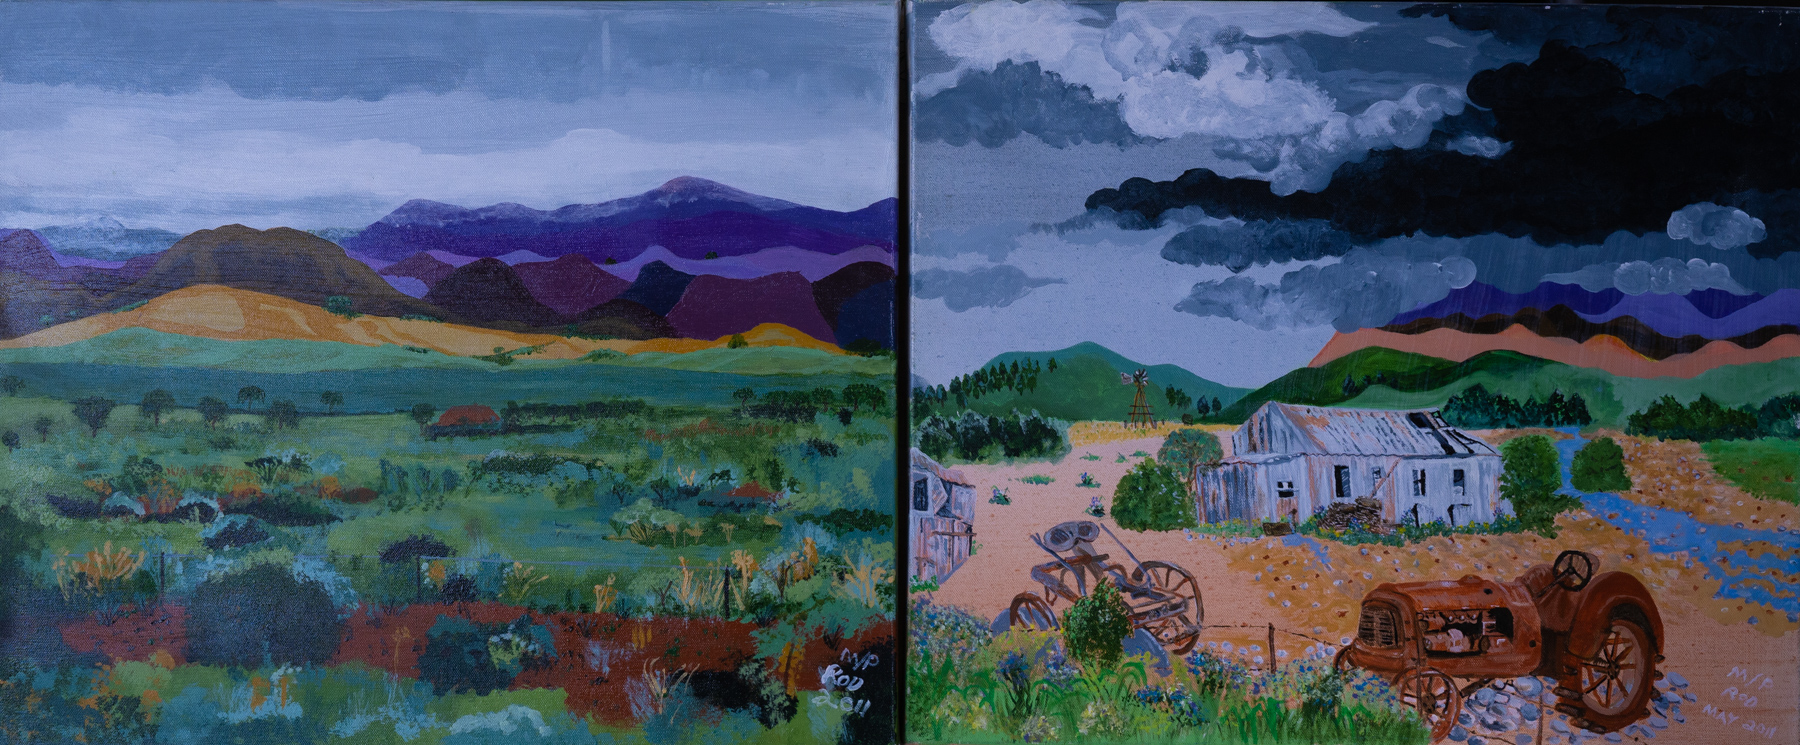 Two paintings of country scape with moody purple, blue, grey sky